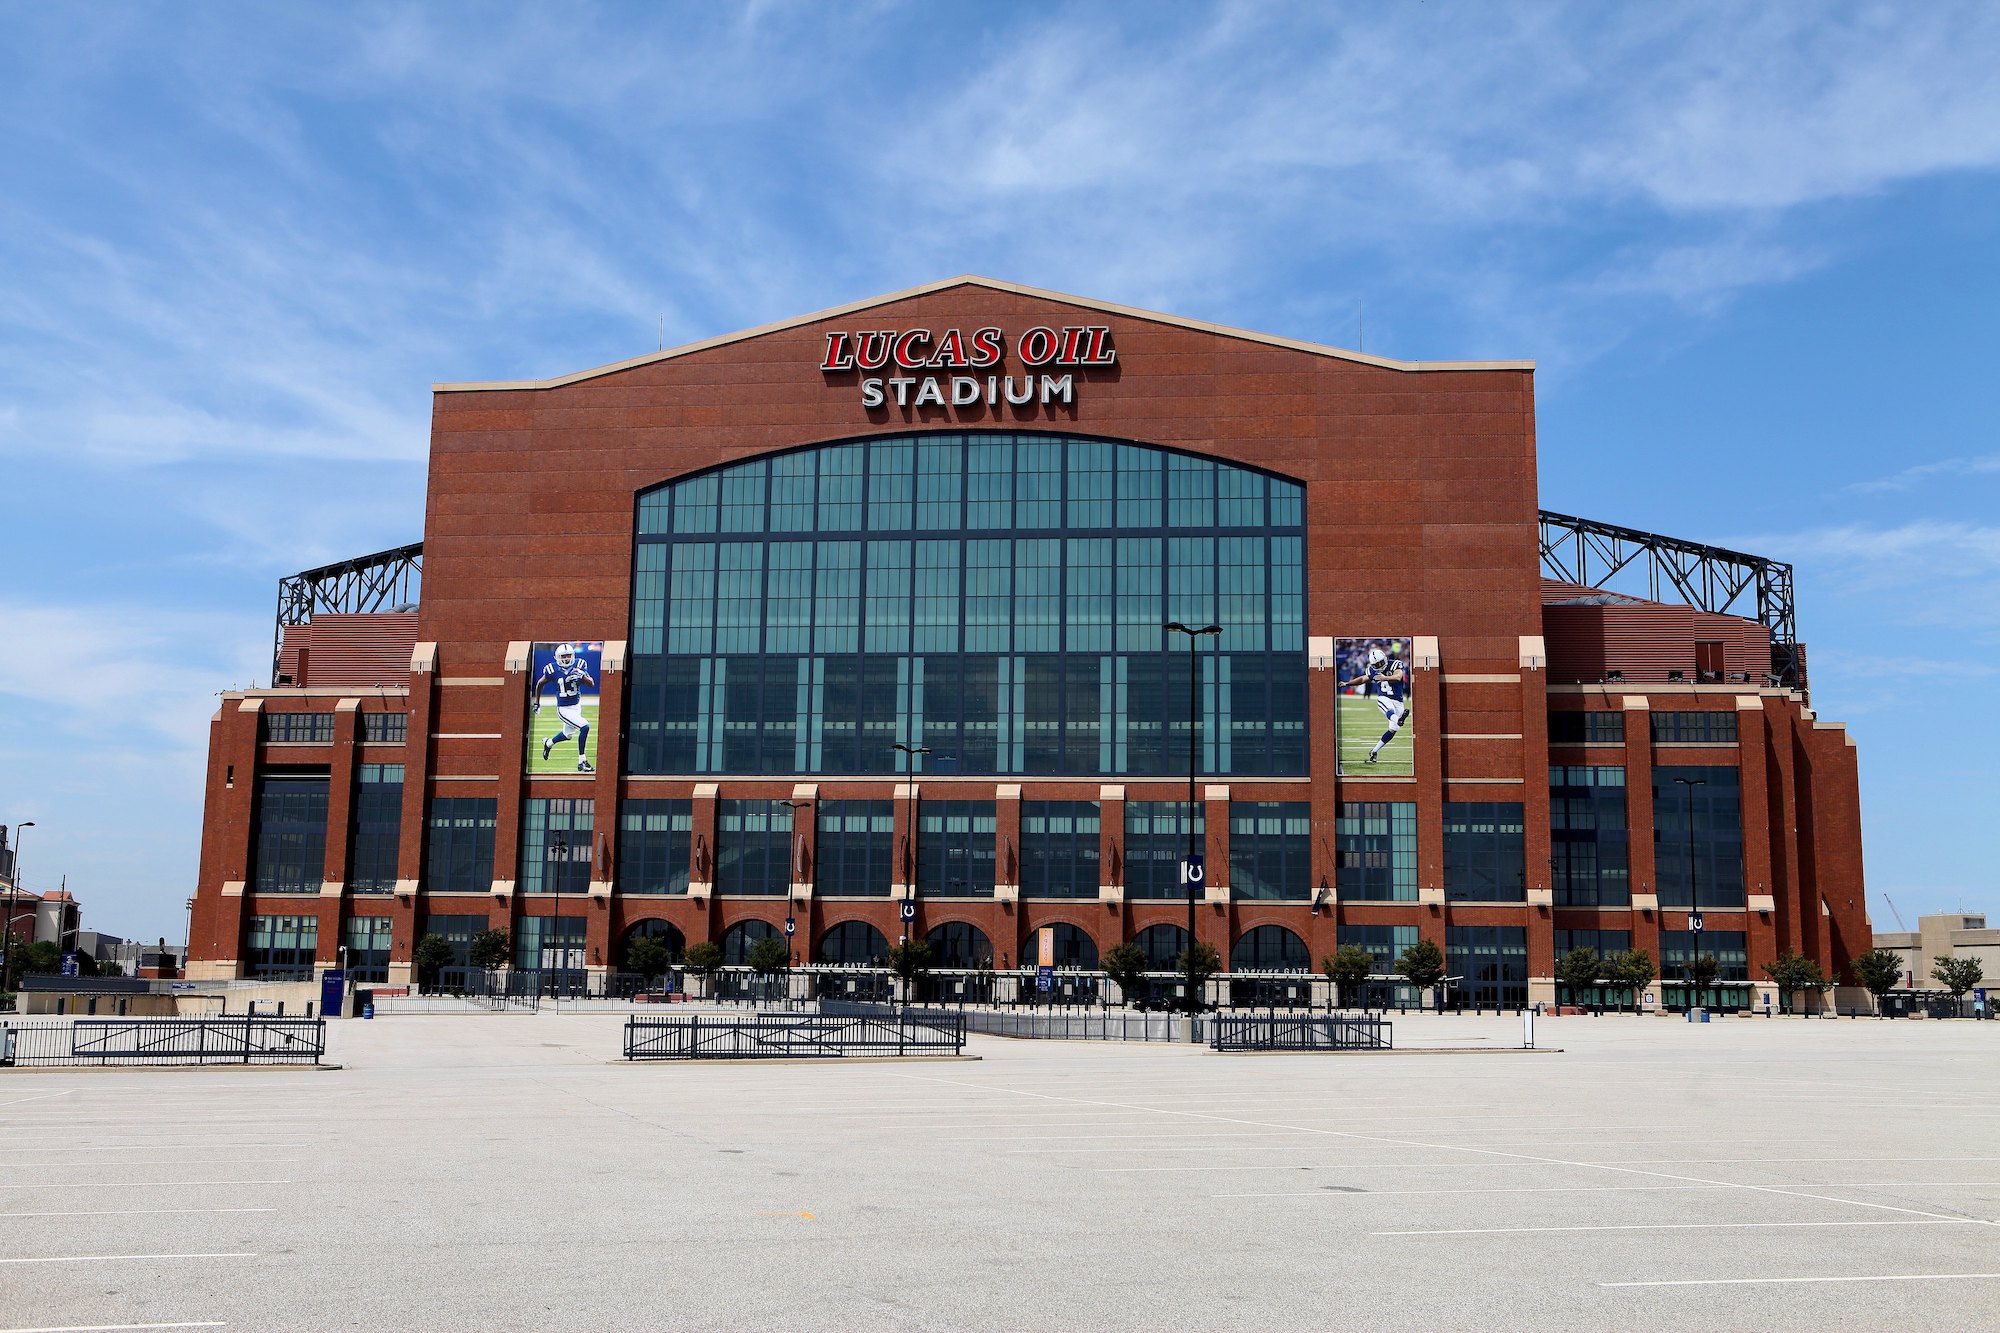 INDIANAPOLIS - JULY 16: Lucas Oil Stadium, home of the Indianapolis Colts football team on July 16, 2015 in Indianapolis, Indiana. (Photo By Raymond Boyd/Getty Images)